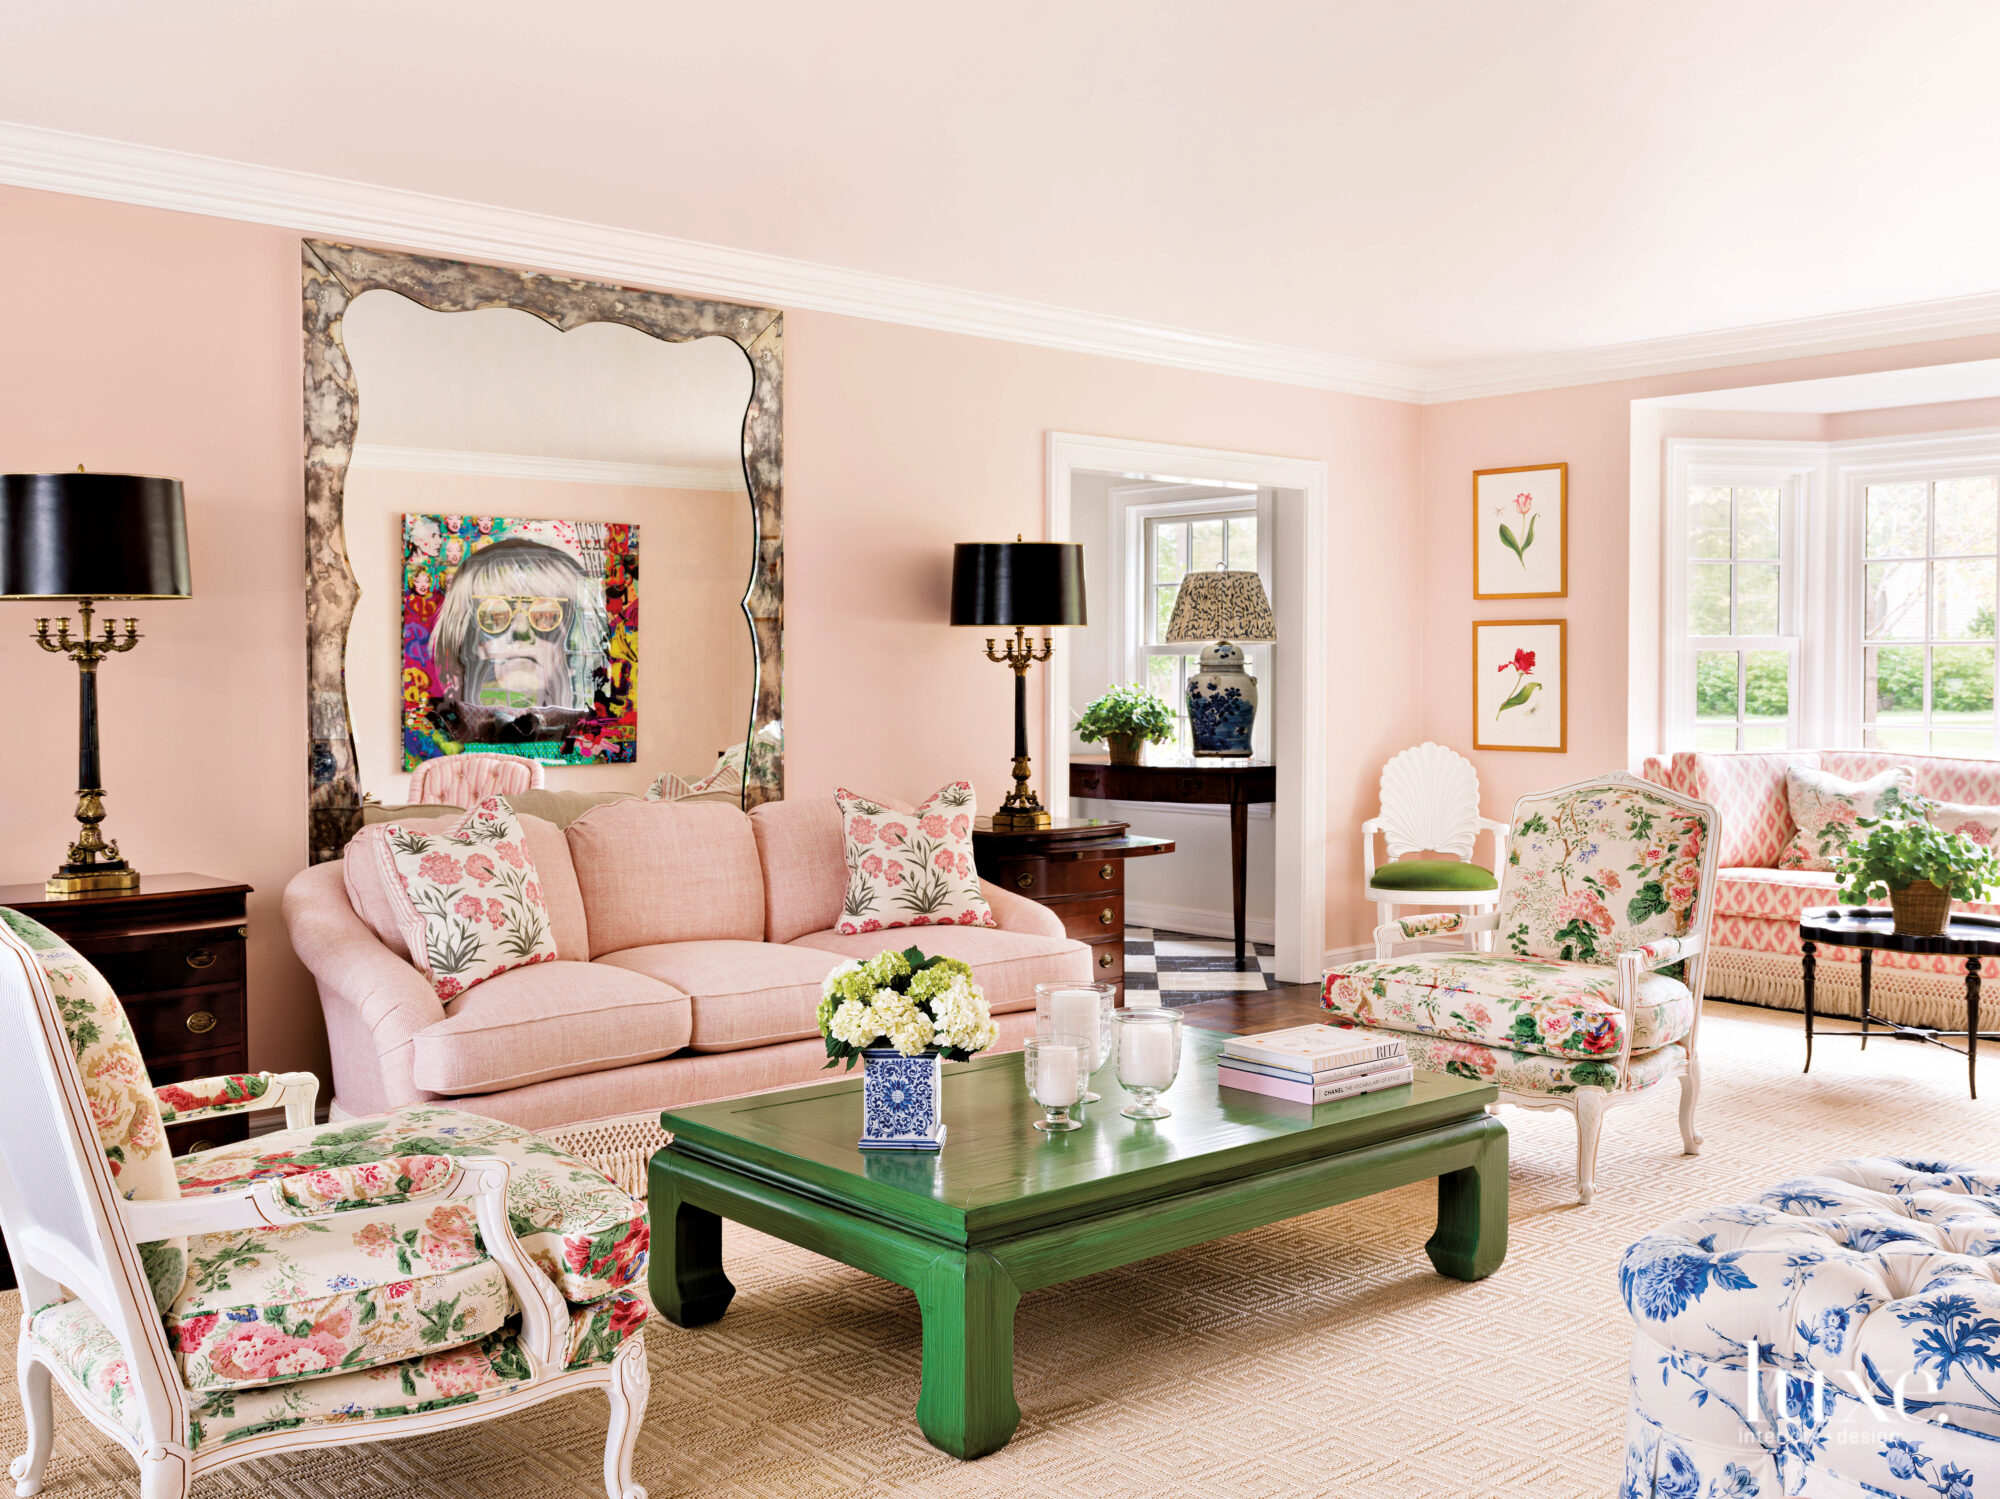 The living room as a collection of vintage furniture with floral armchairs, a green coffee table and a pink couch.